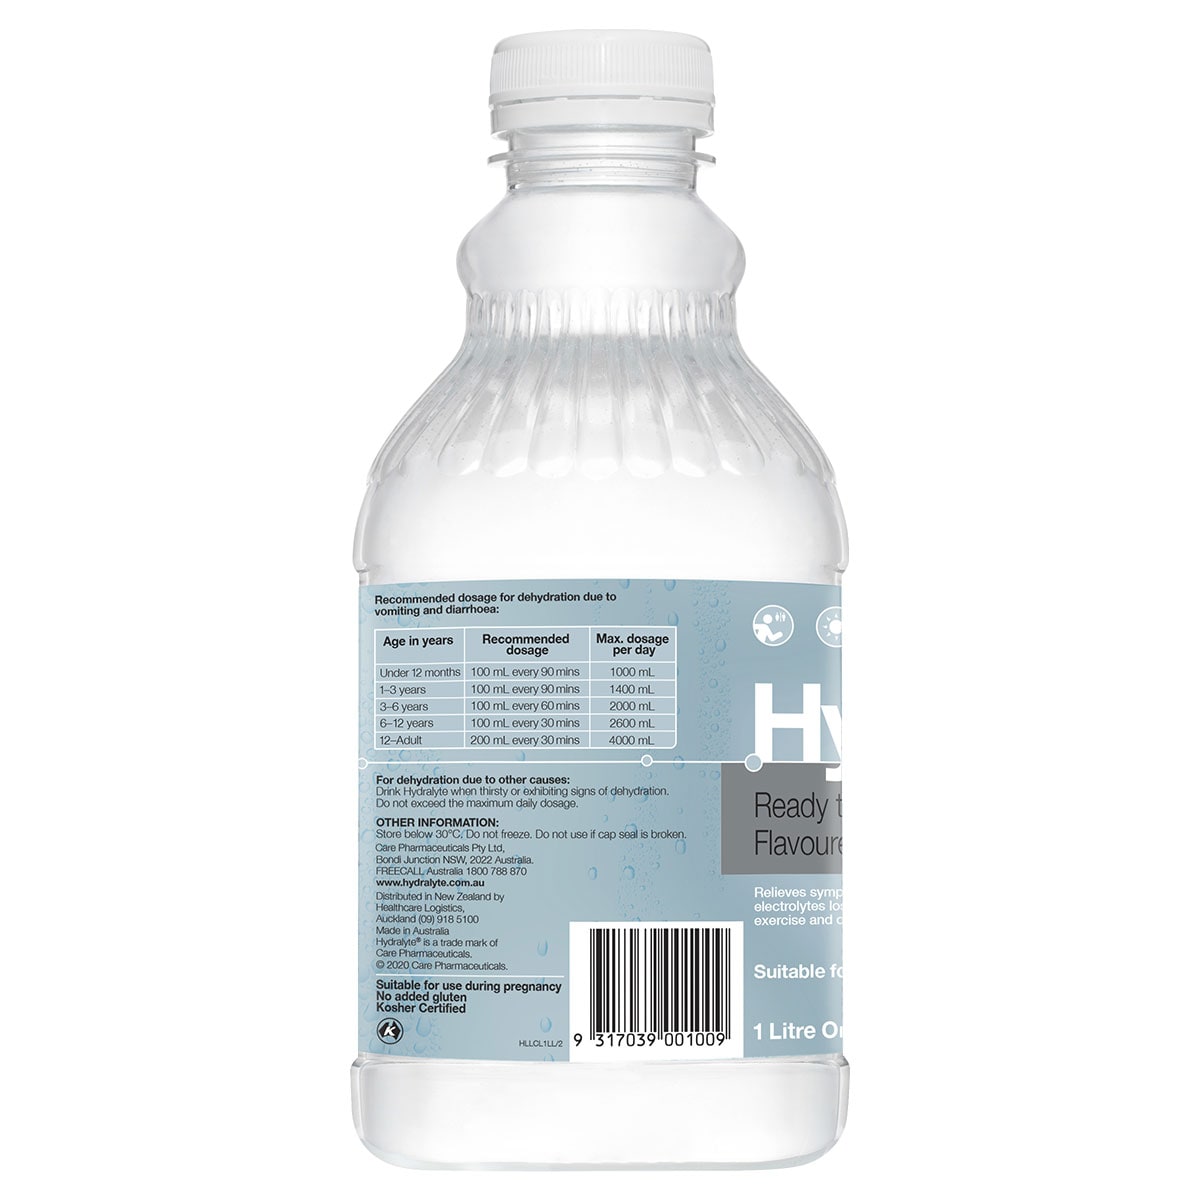 Hydralyte Ready to Use Electrolyte Solution Lemonade - 1 Litre